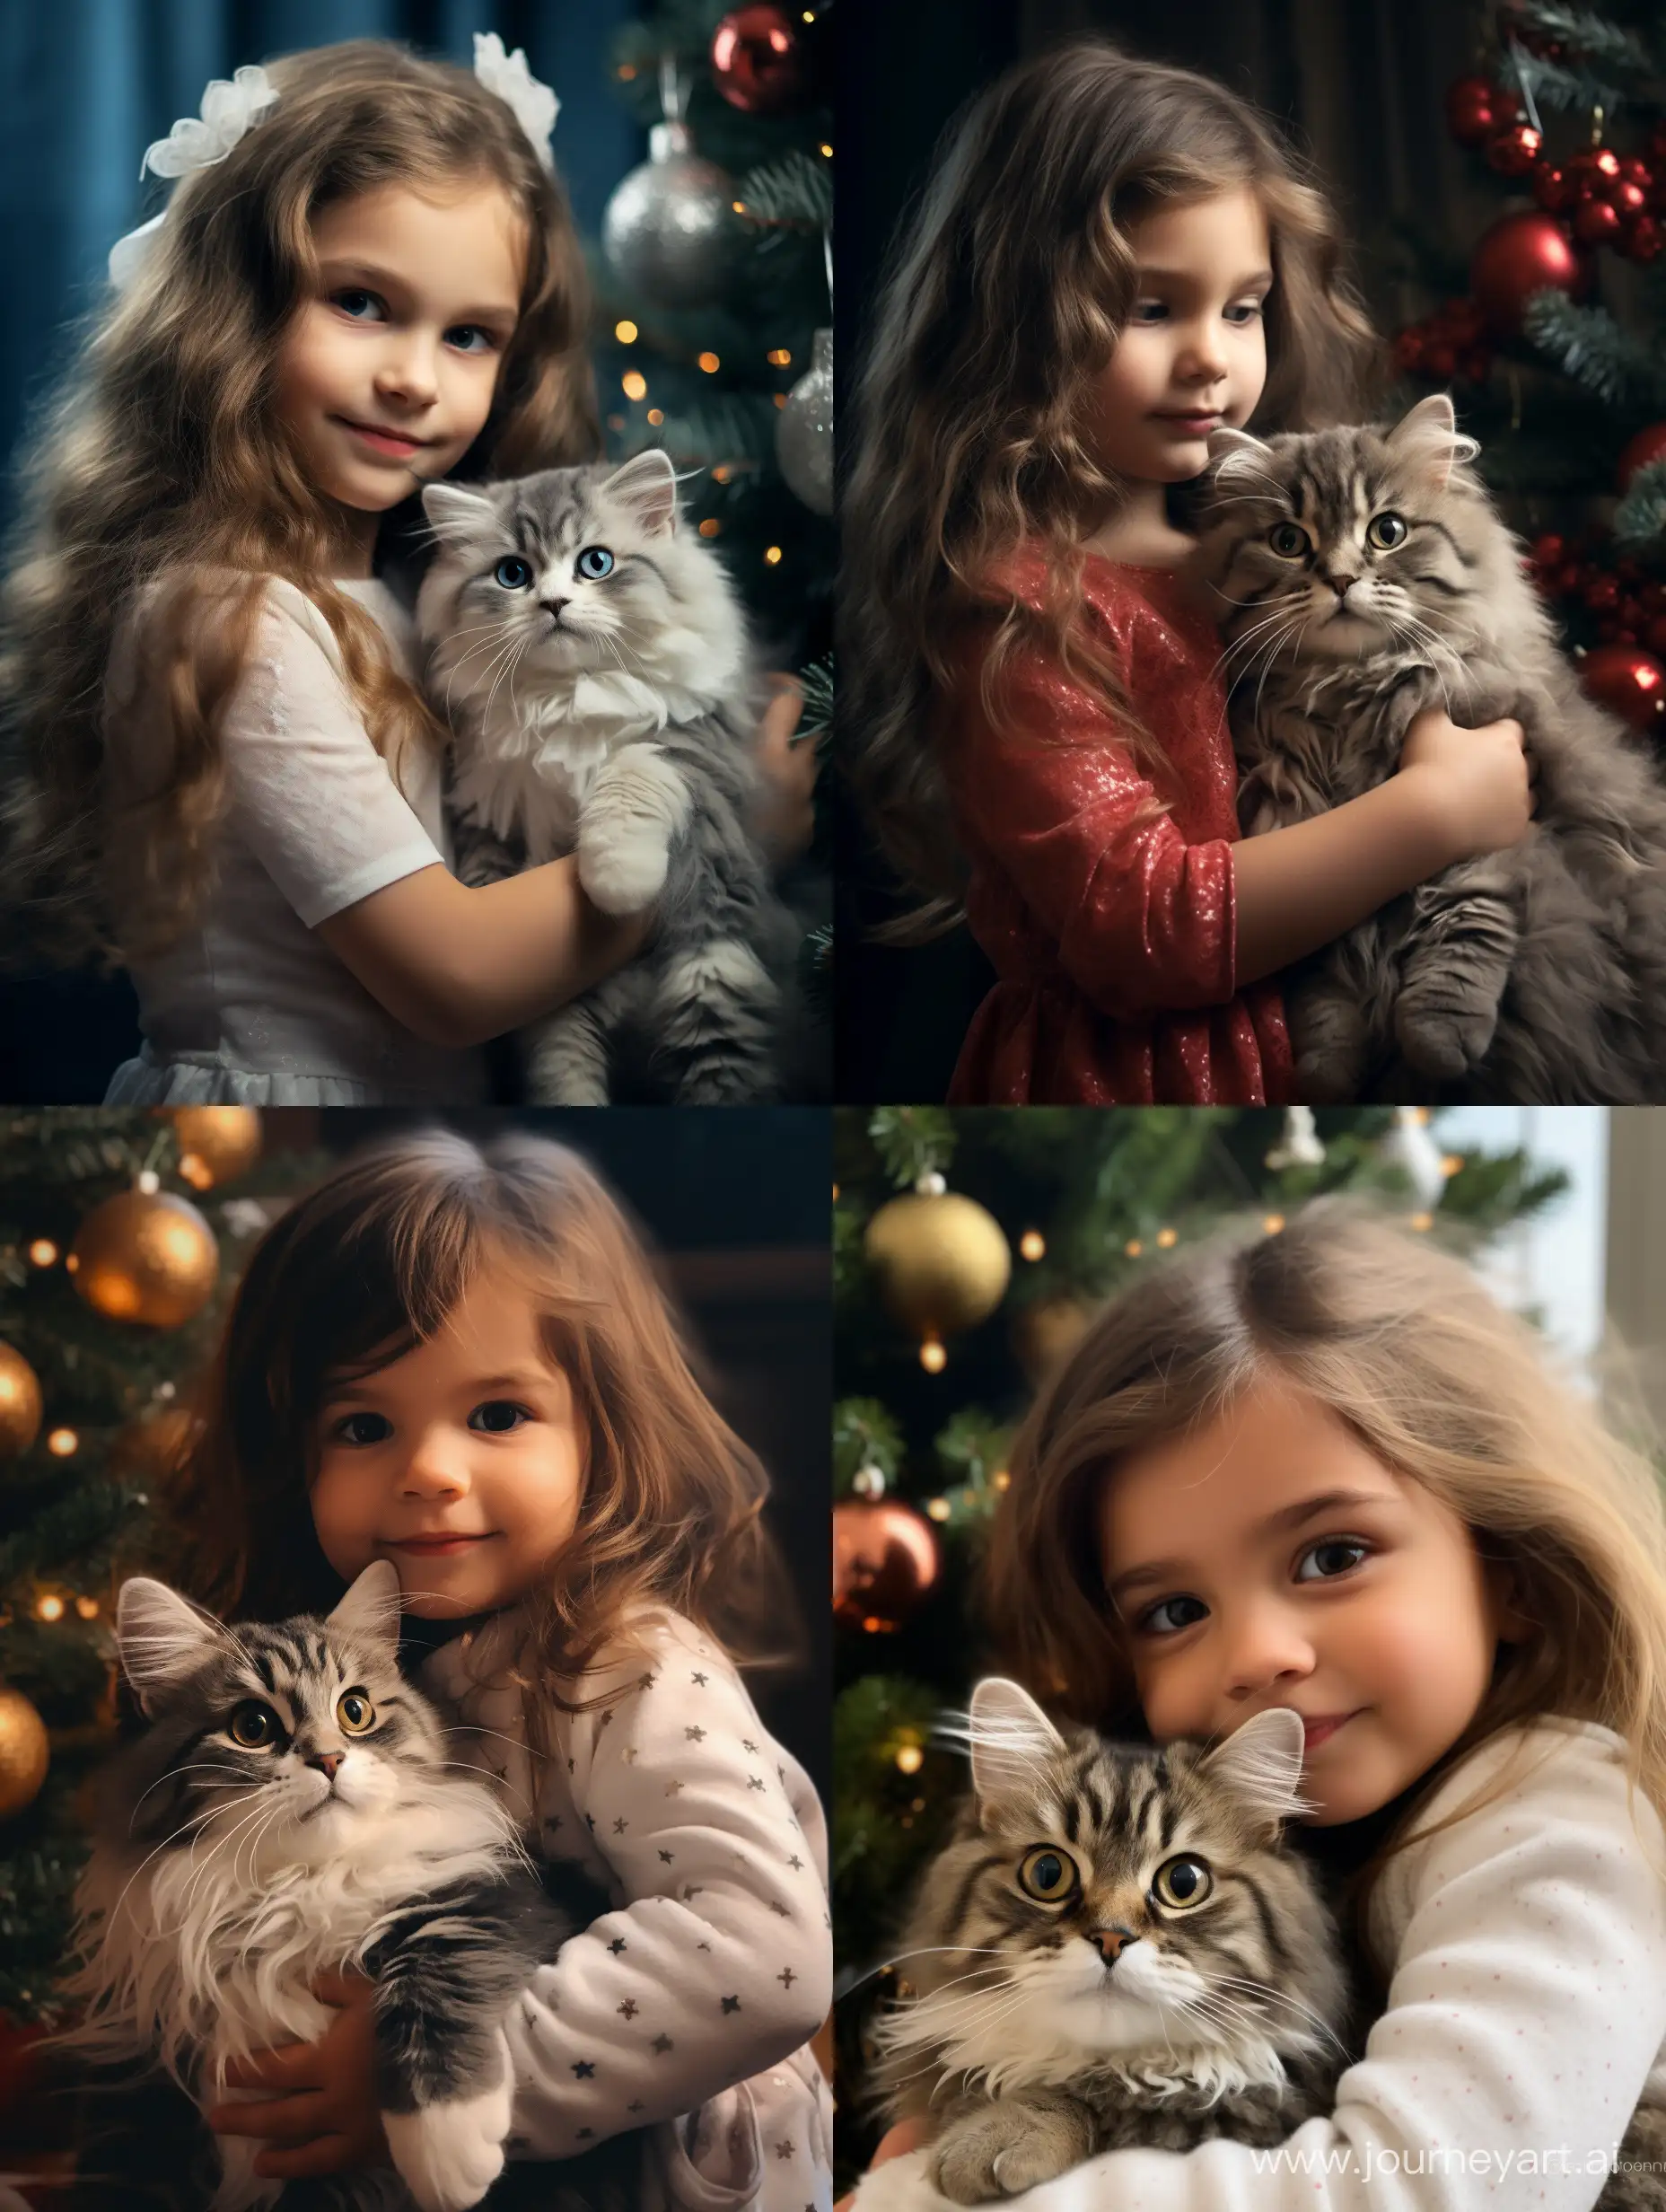 Adorable-Christmas-Moment-Little-Girl-Embracing-a-Cat-by-the-Christmas-Tree